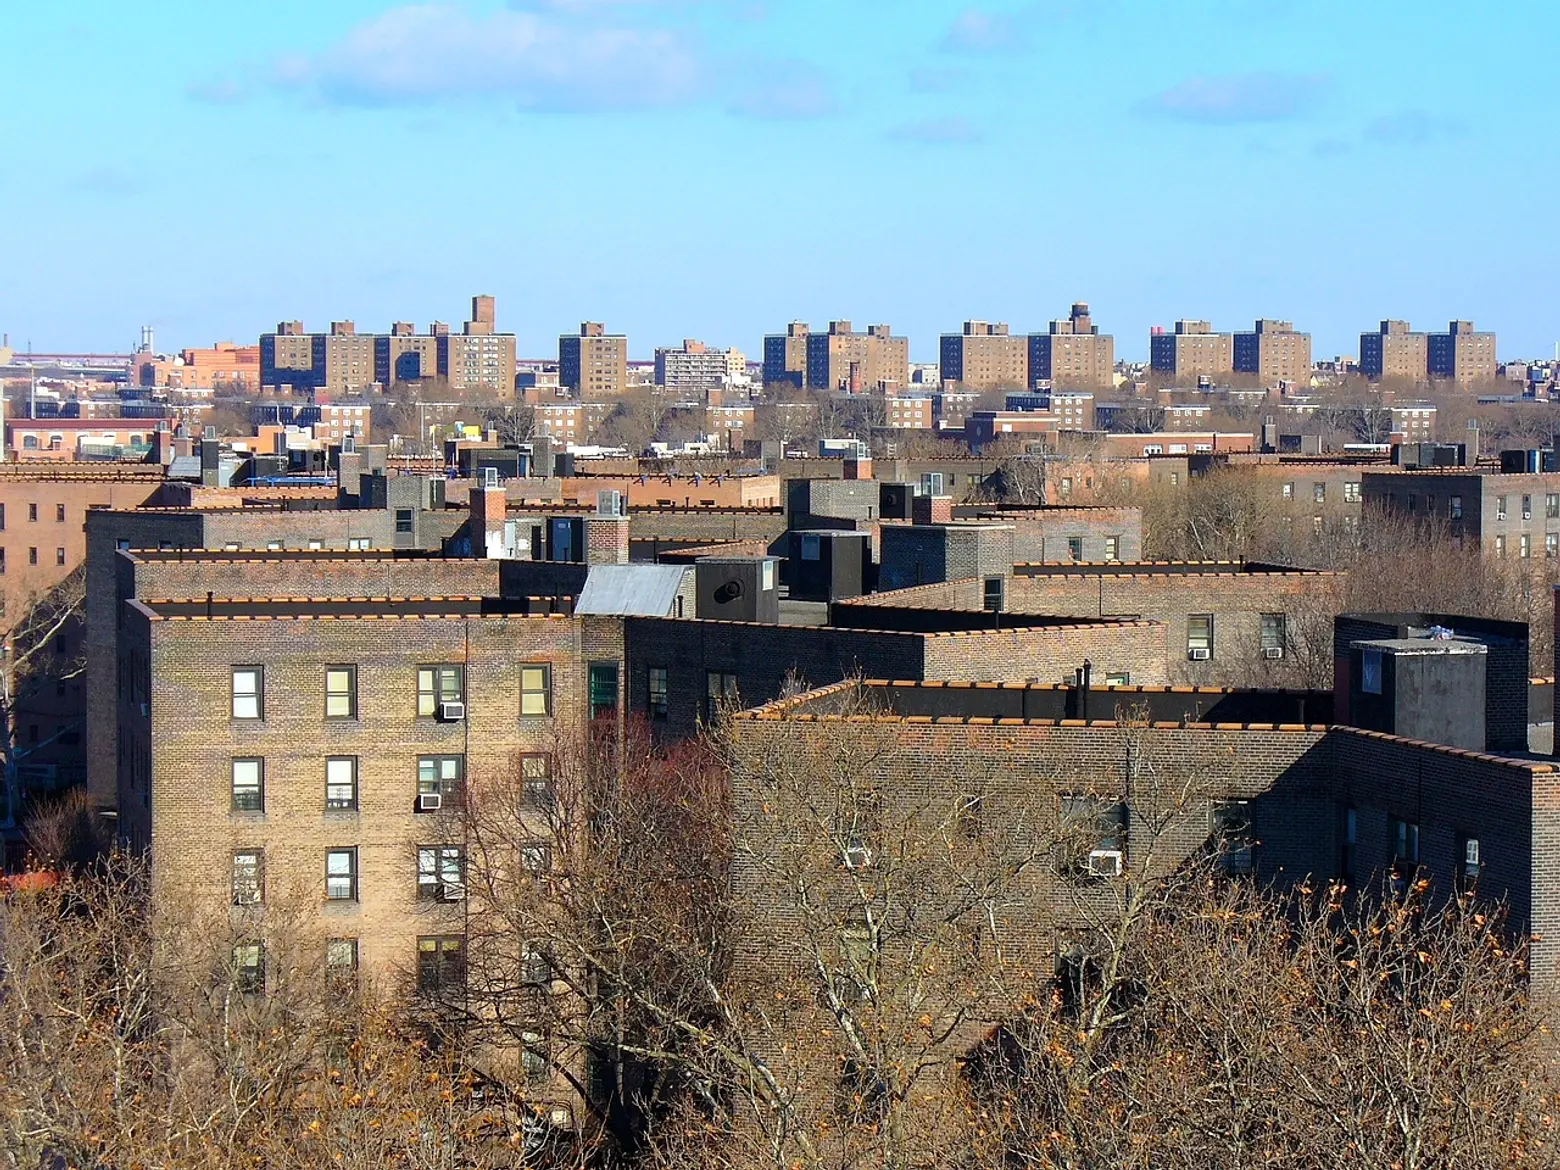 Cuomo to expand COVID-19 testing at NYC public housing